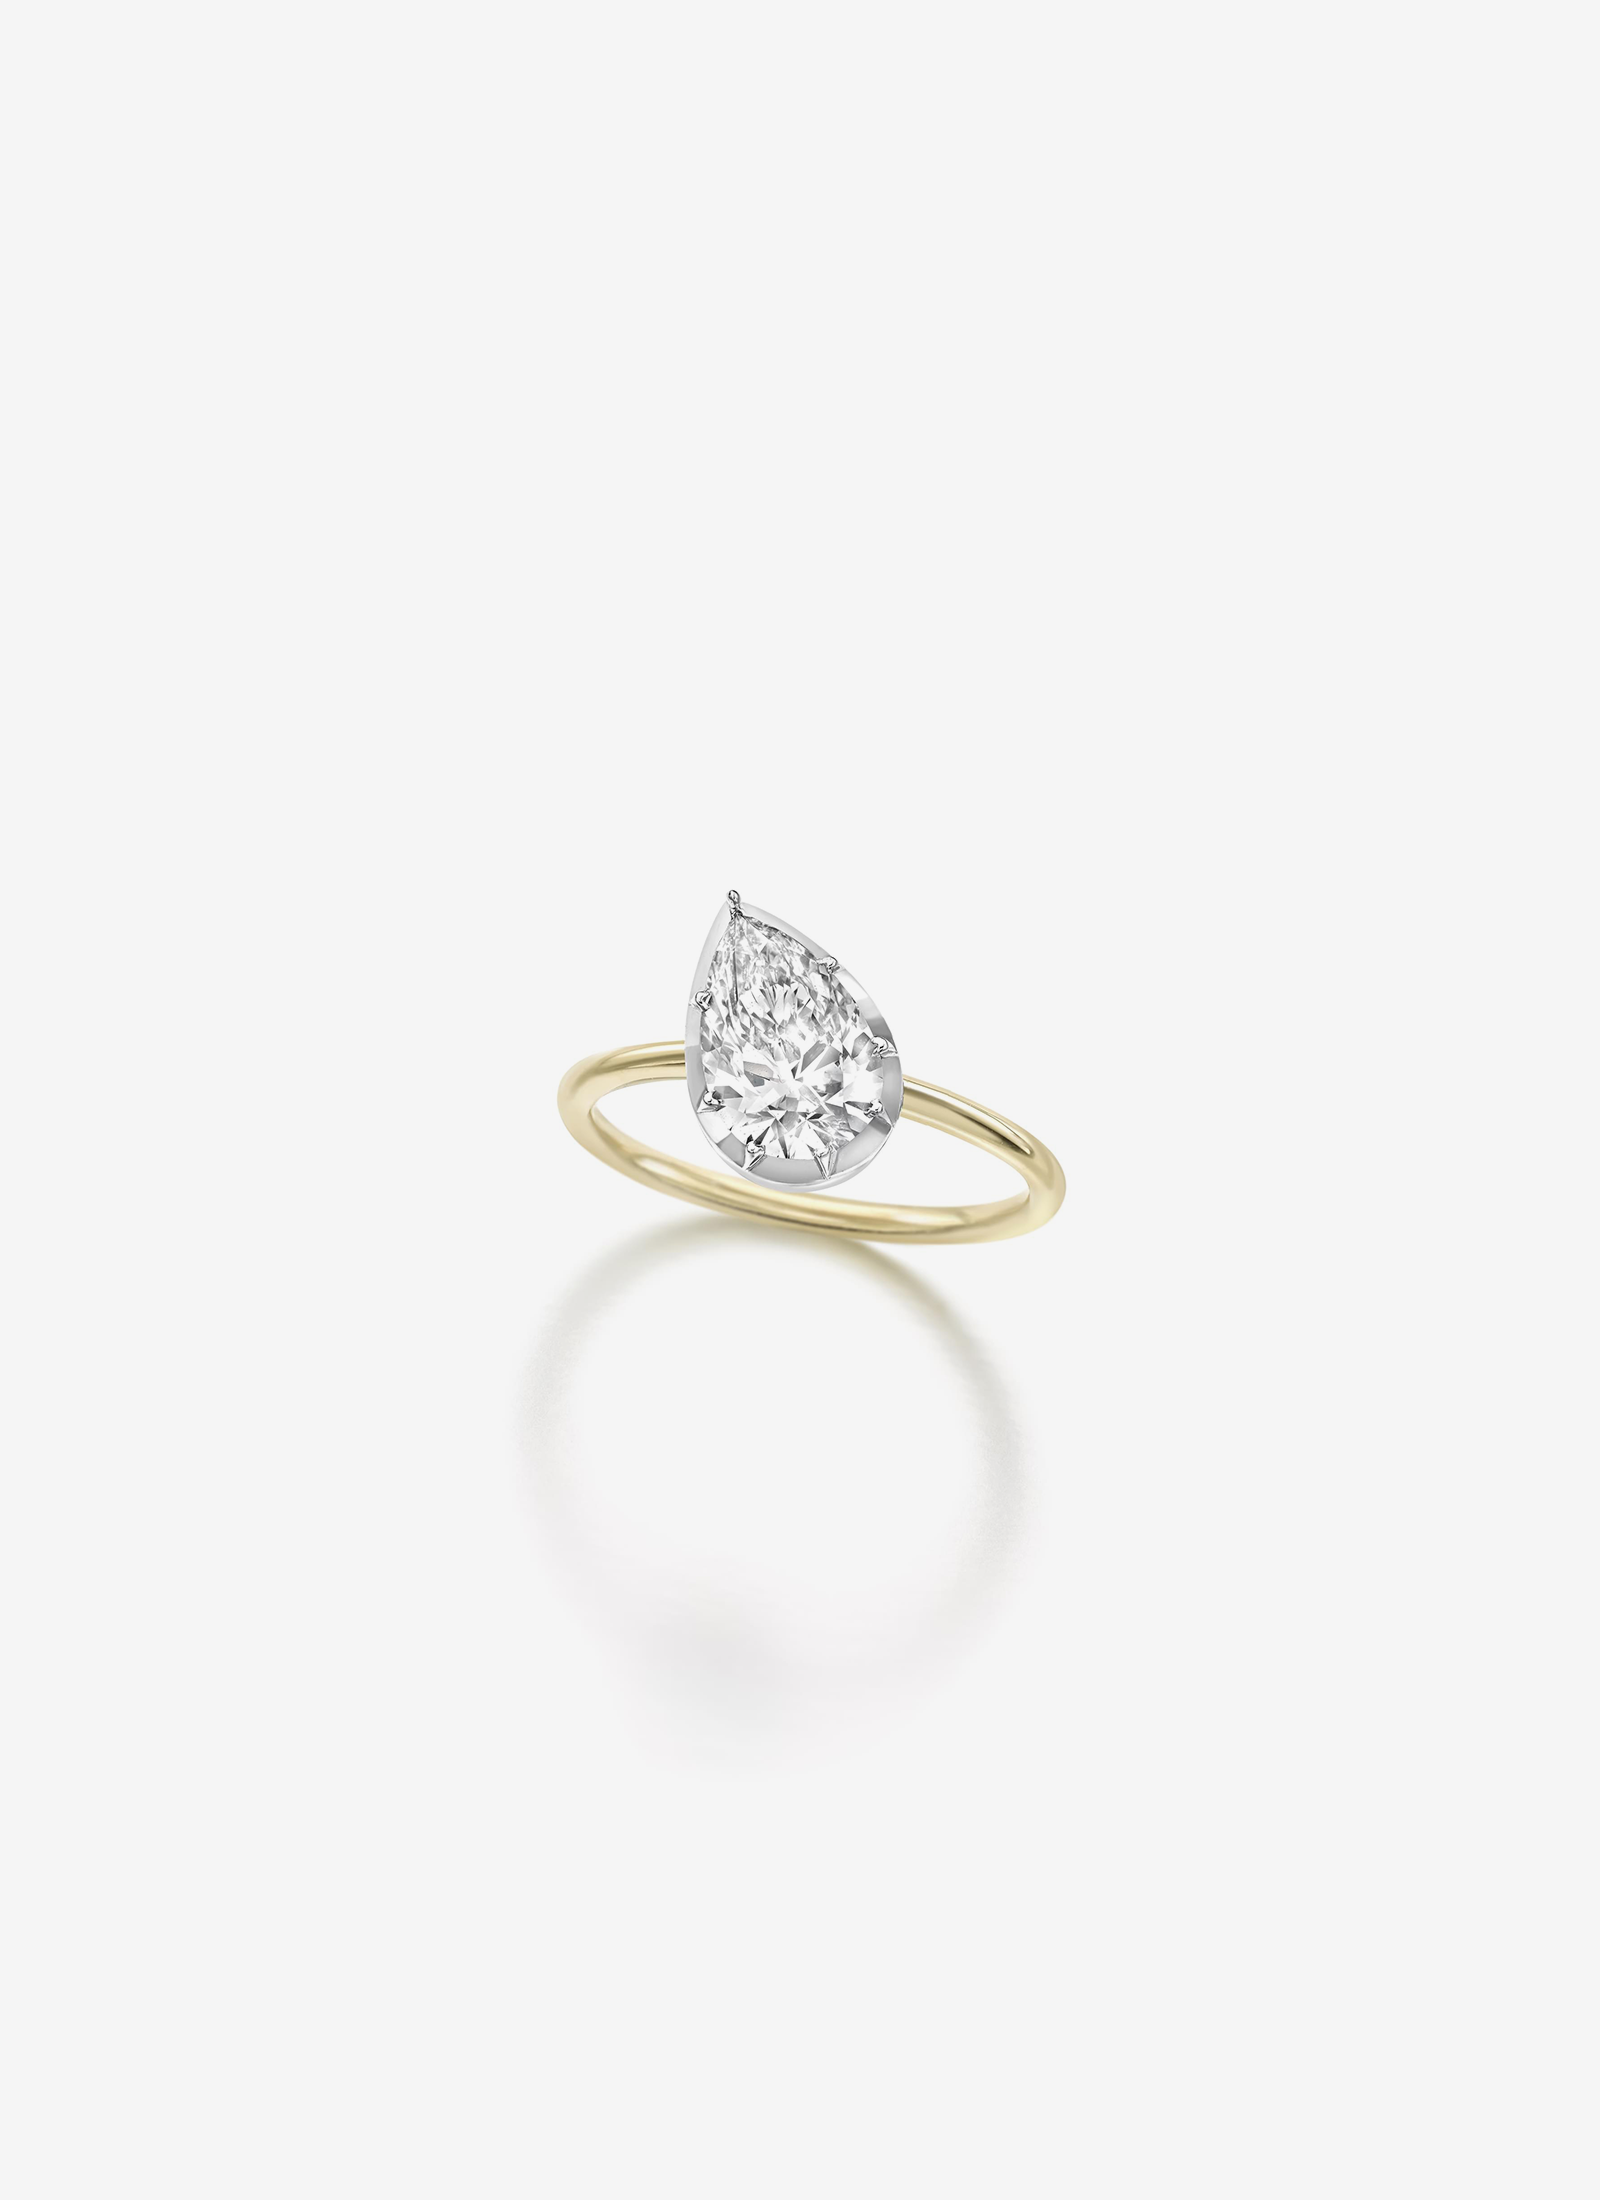 Button Back 1.50ct Pear Tilted Diamond Ring - WG